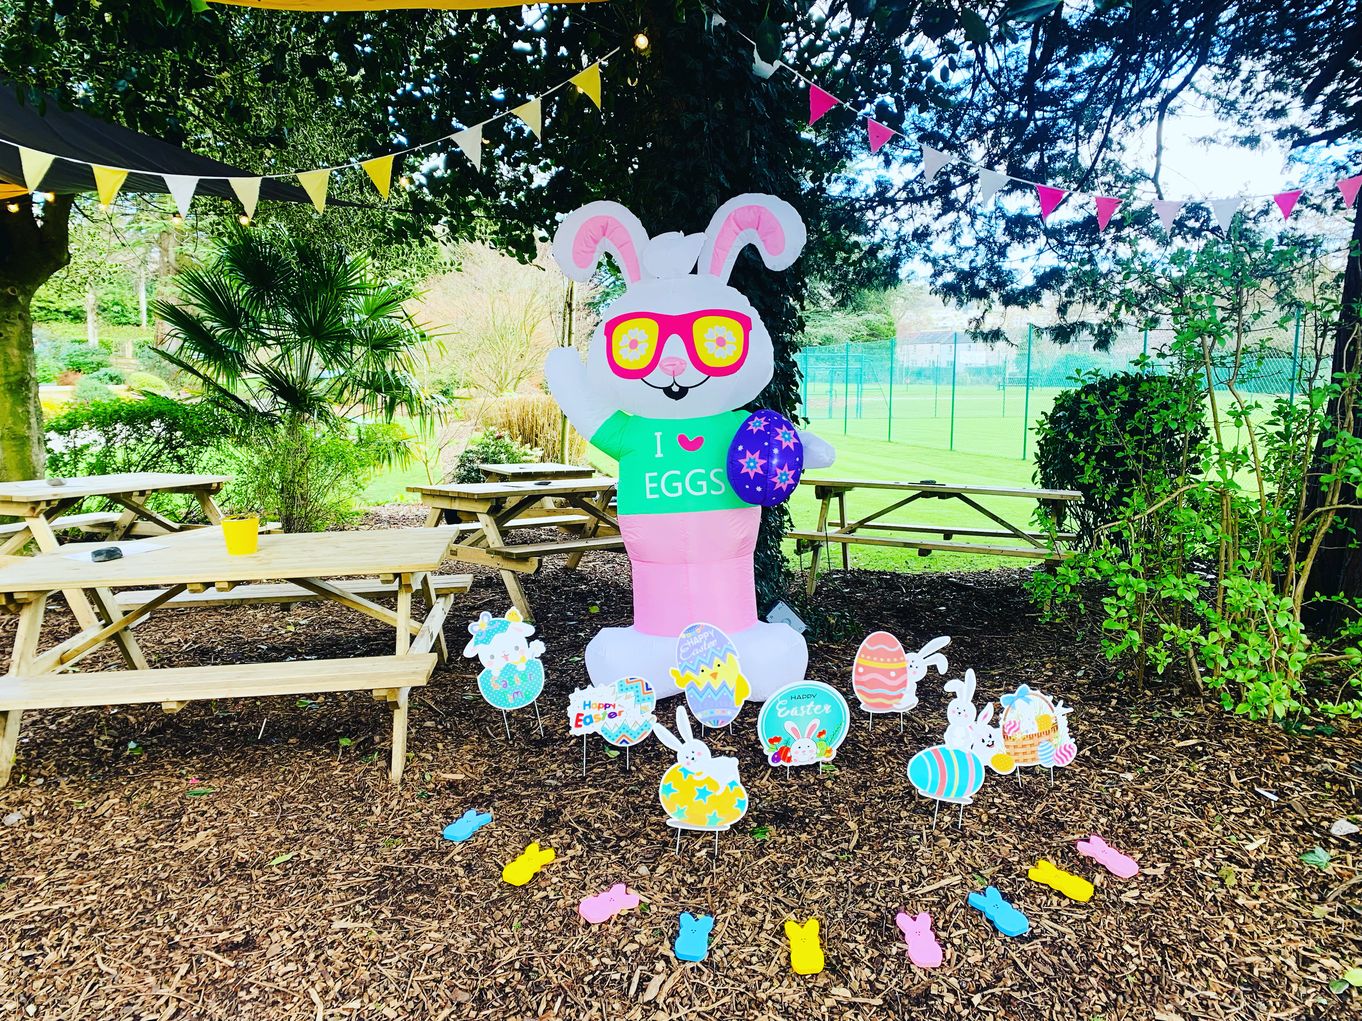 Easter Bunny Trail